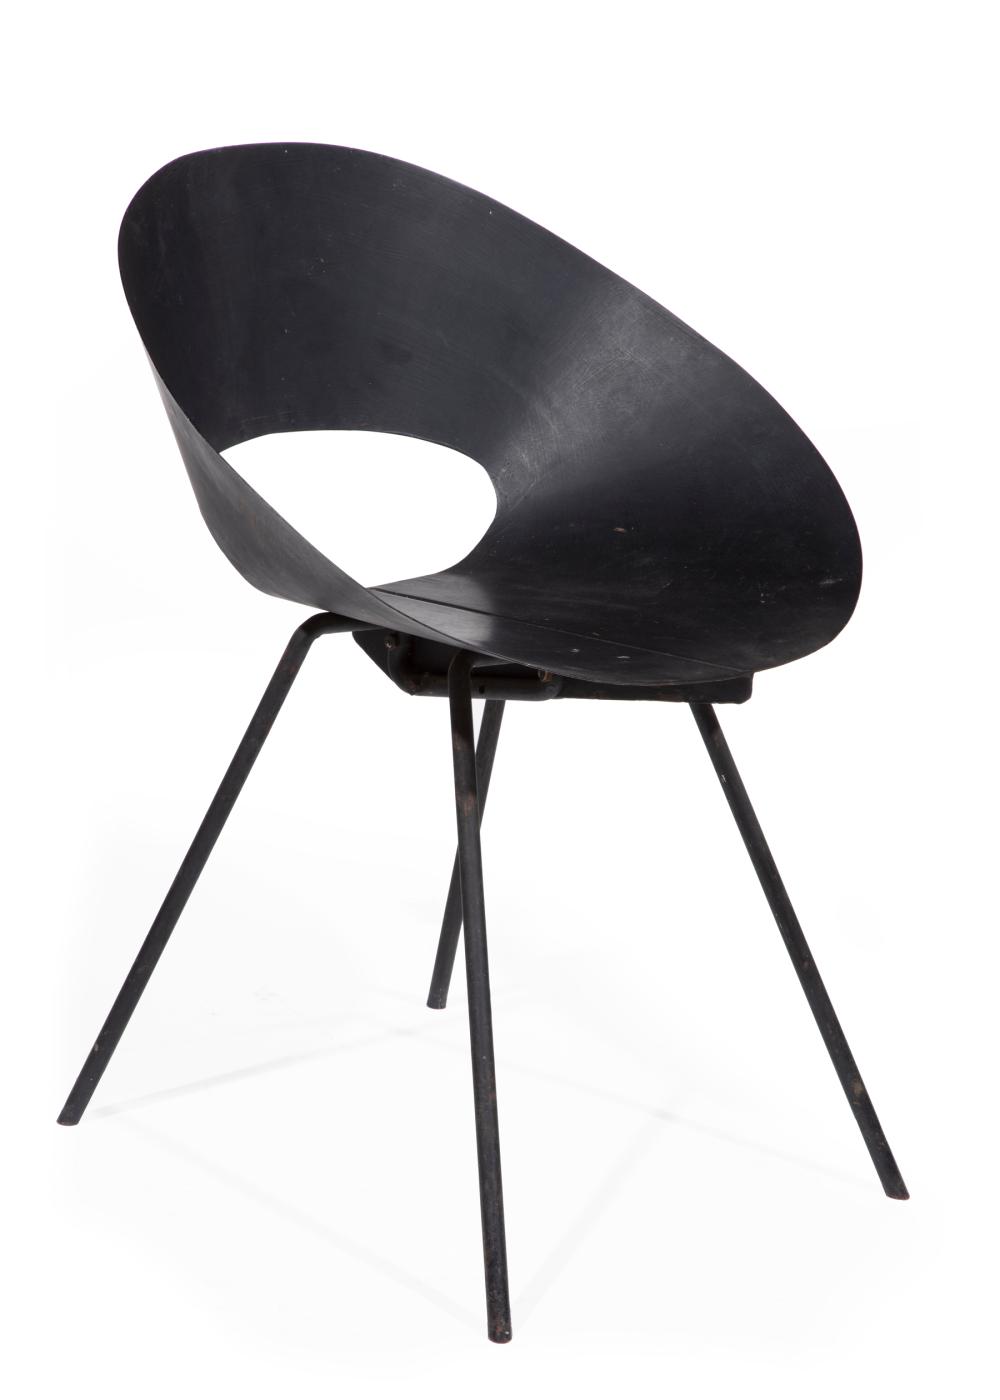 DONALD KNORR FOR KNOLL 132U CHAIRDonald